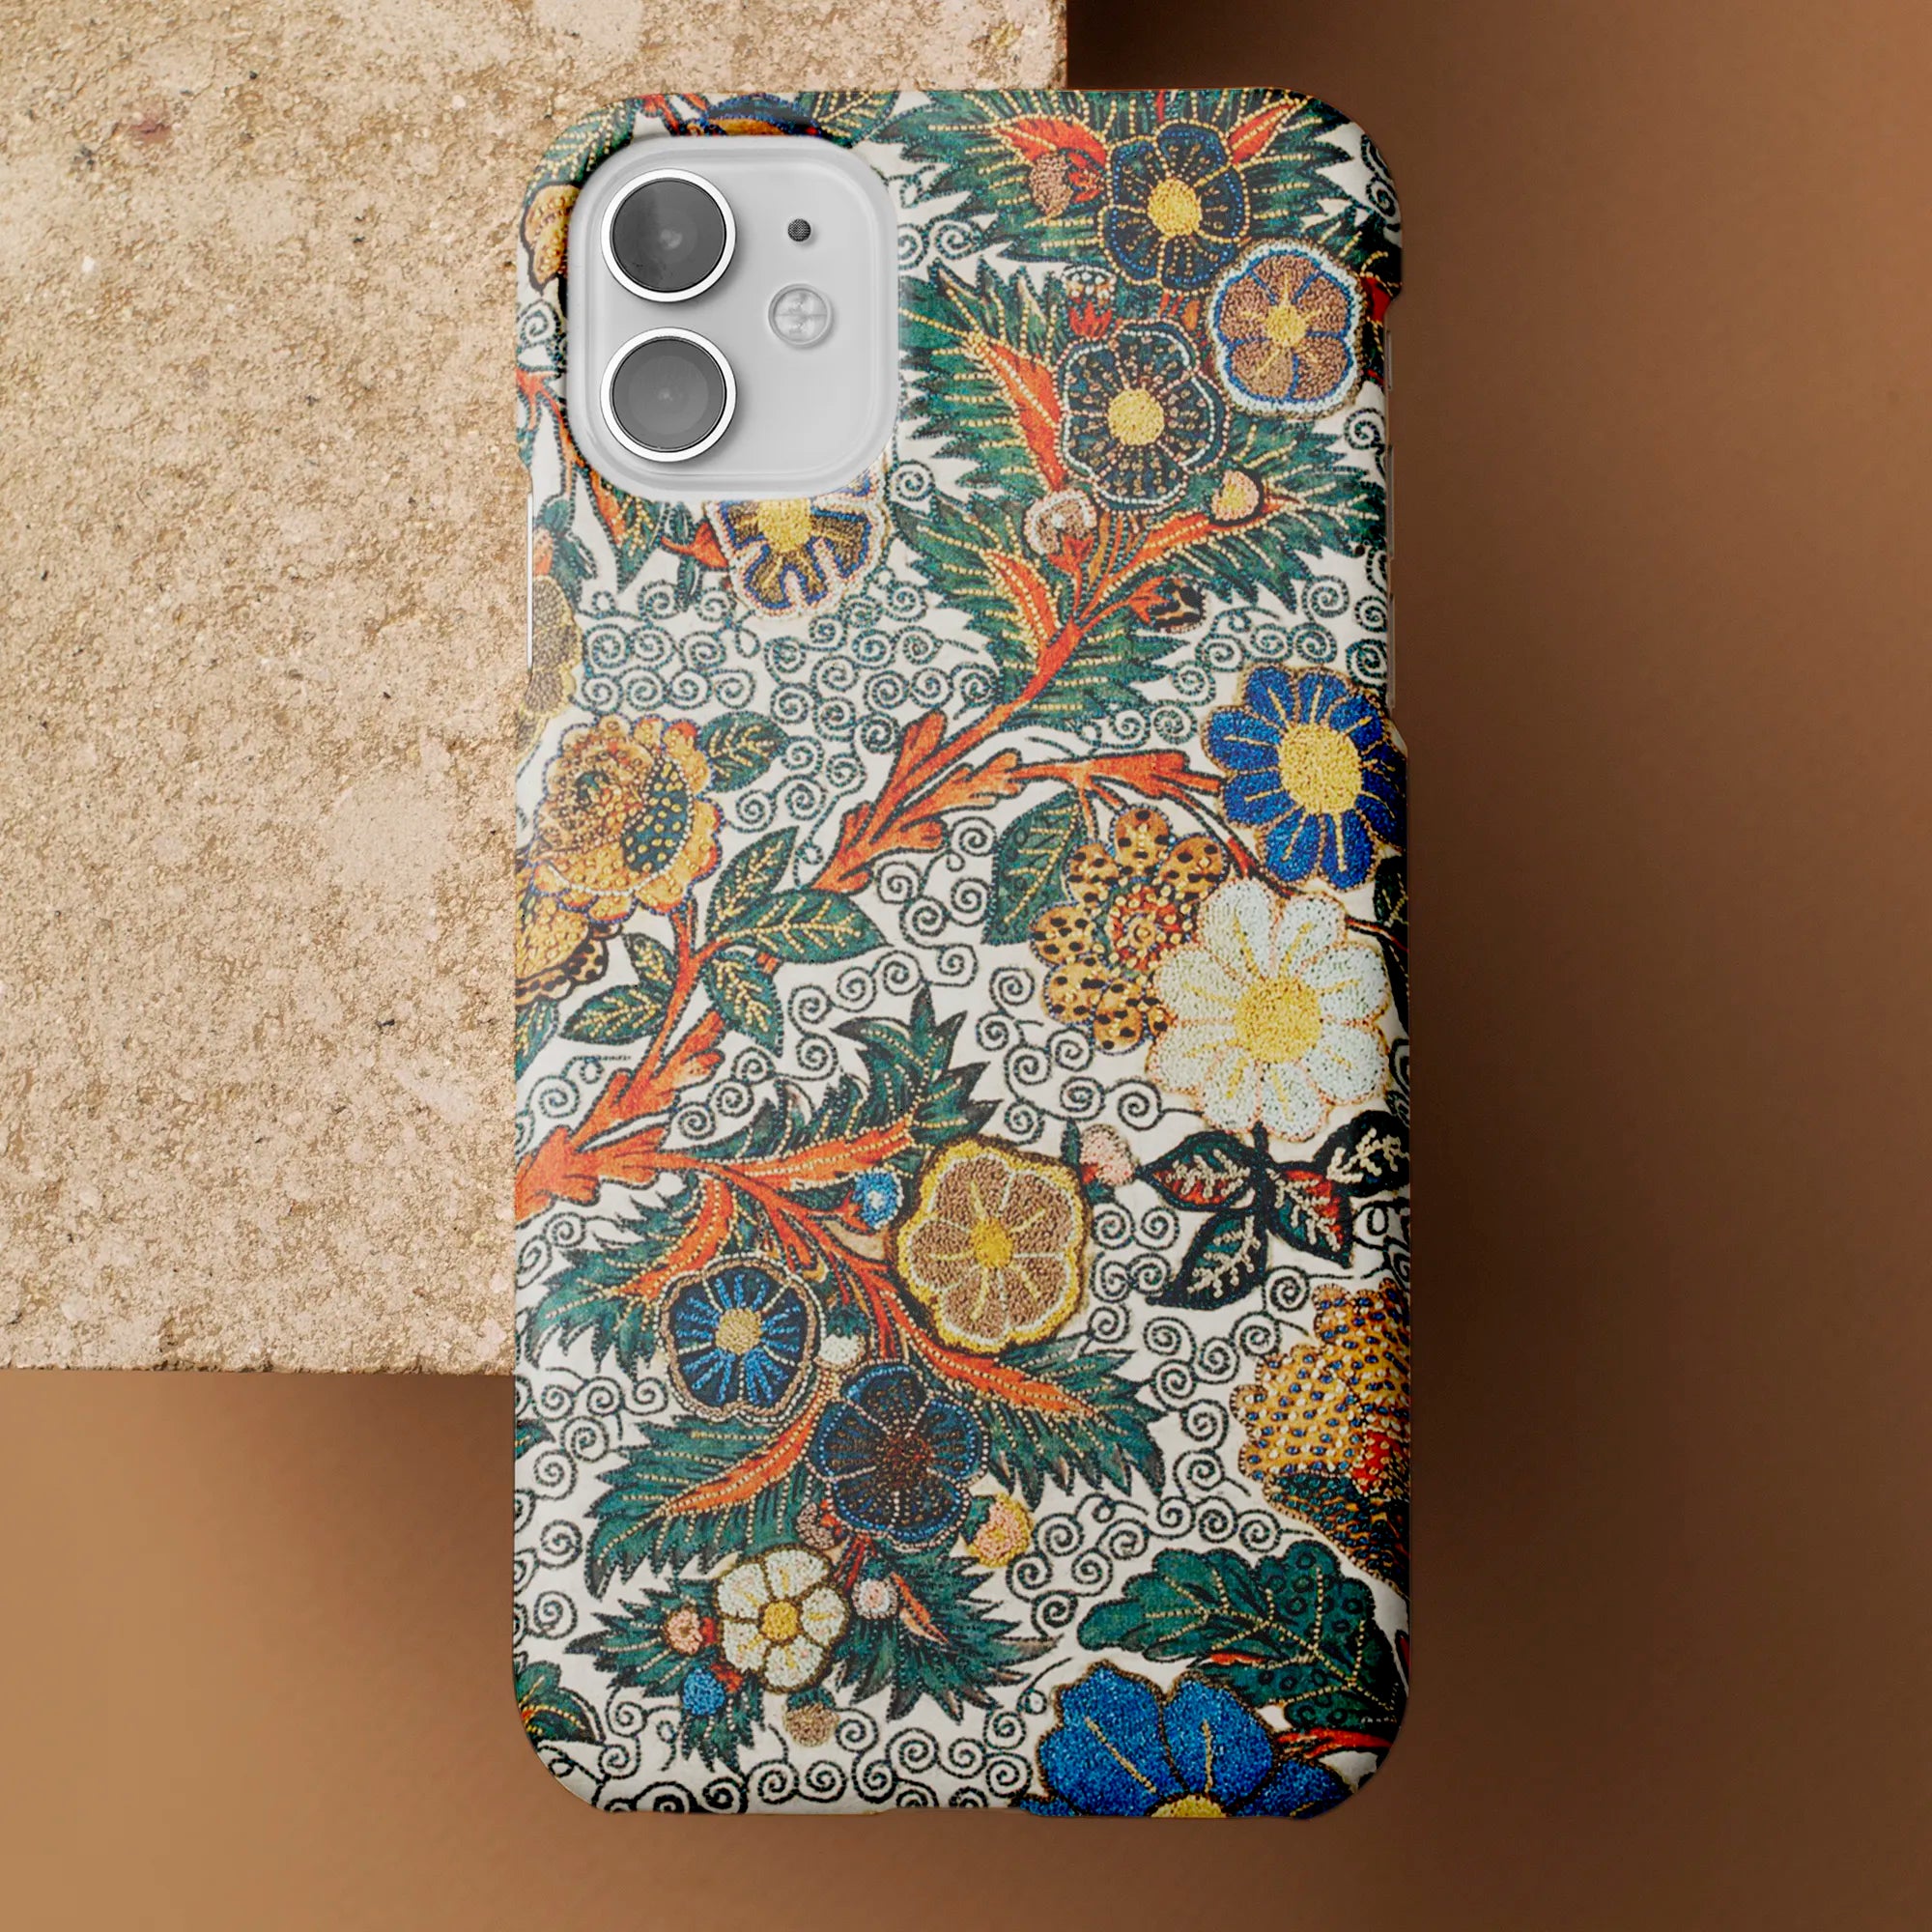 Art x Life — Aesthetic Phone Cases From Kitsch To Classic